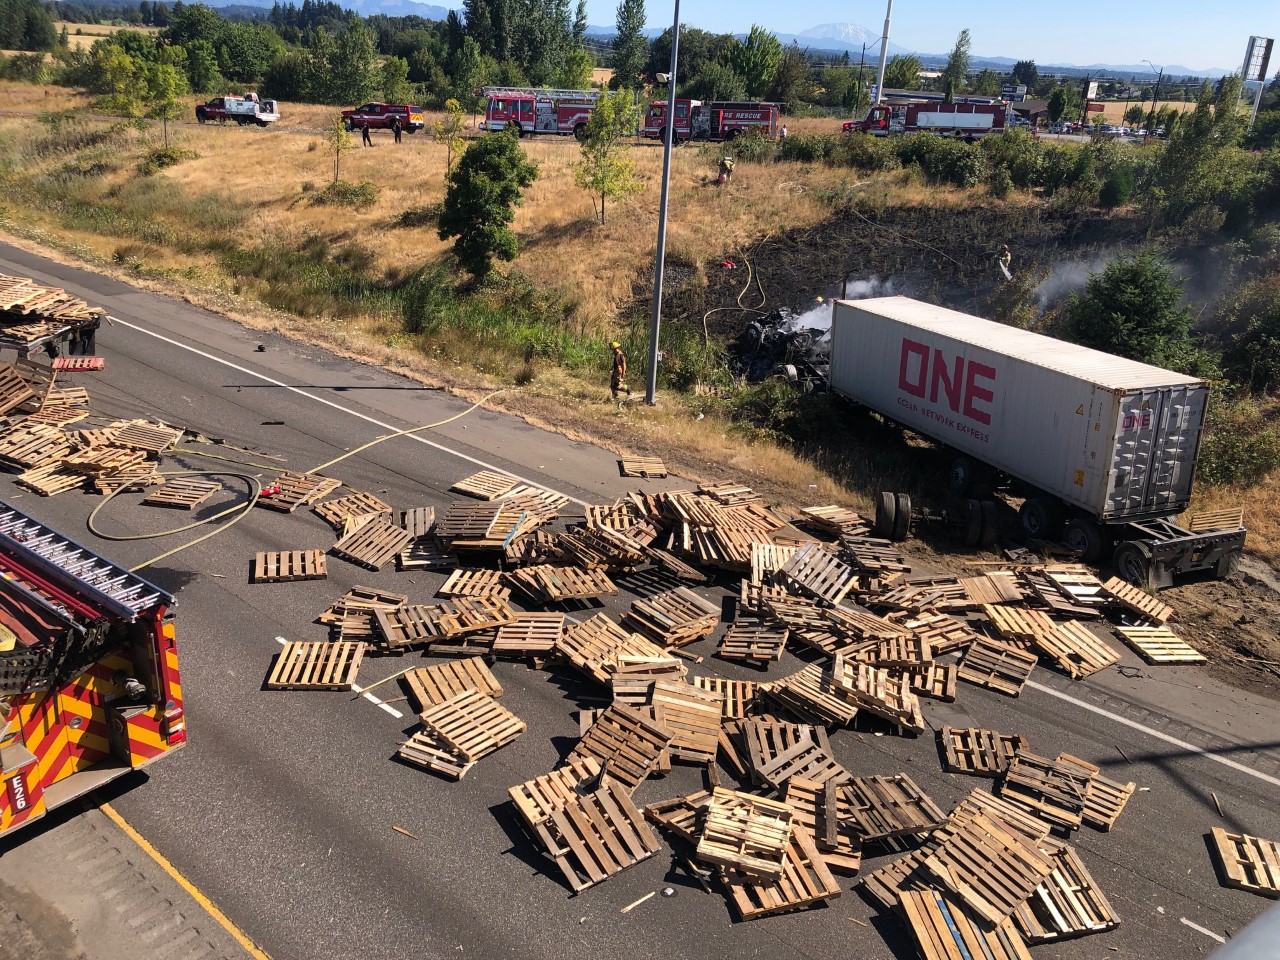 Two semis were involved in a crash on I-5 on Monday morning in the backup from an earlier crash on the Lewis River Bridge. One person was injured in the crash involving the semis.